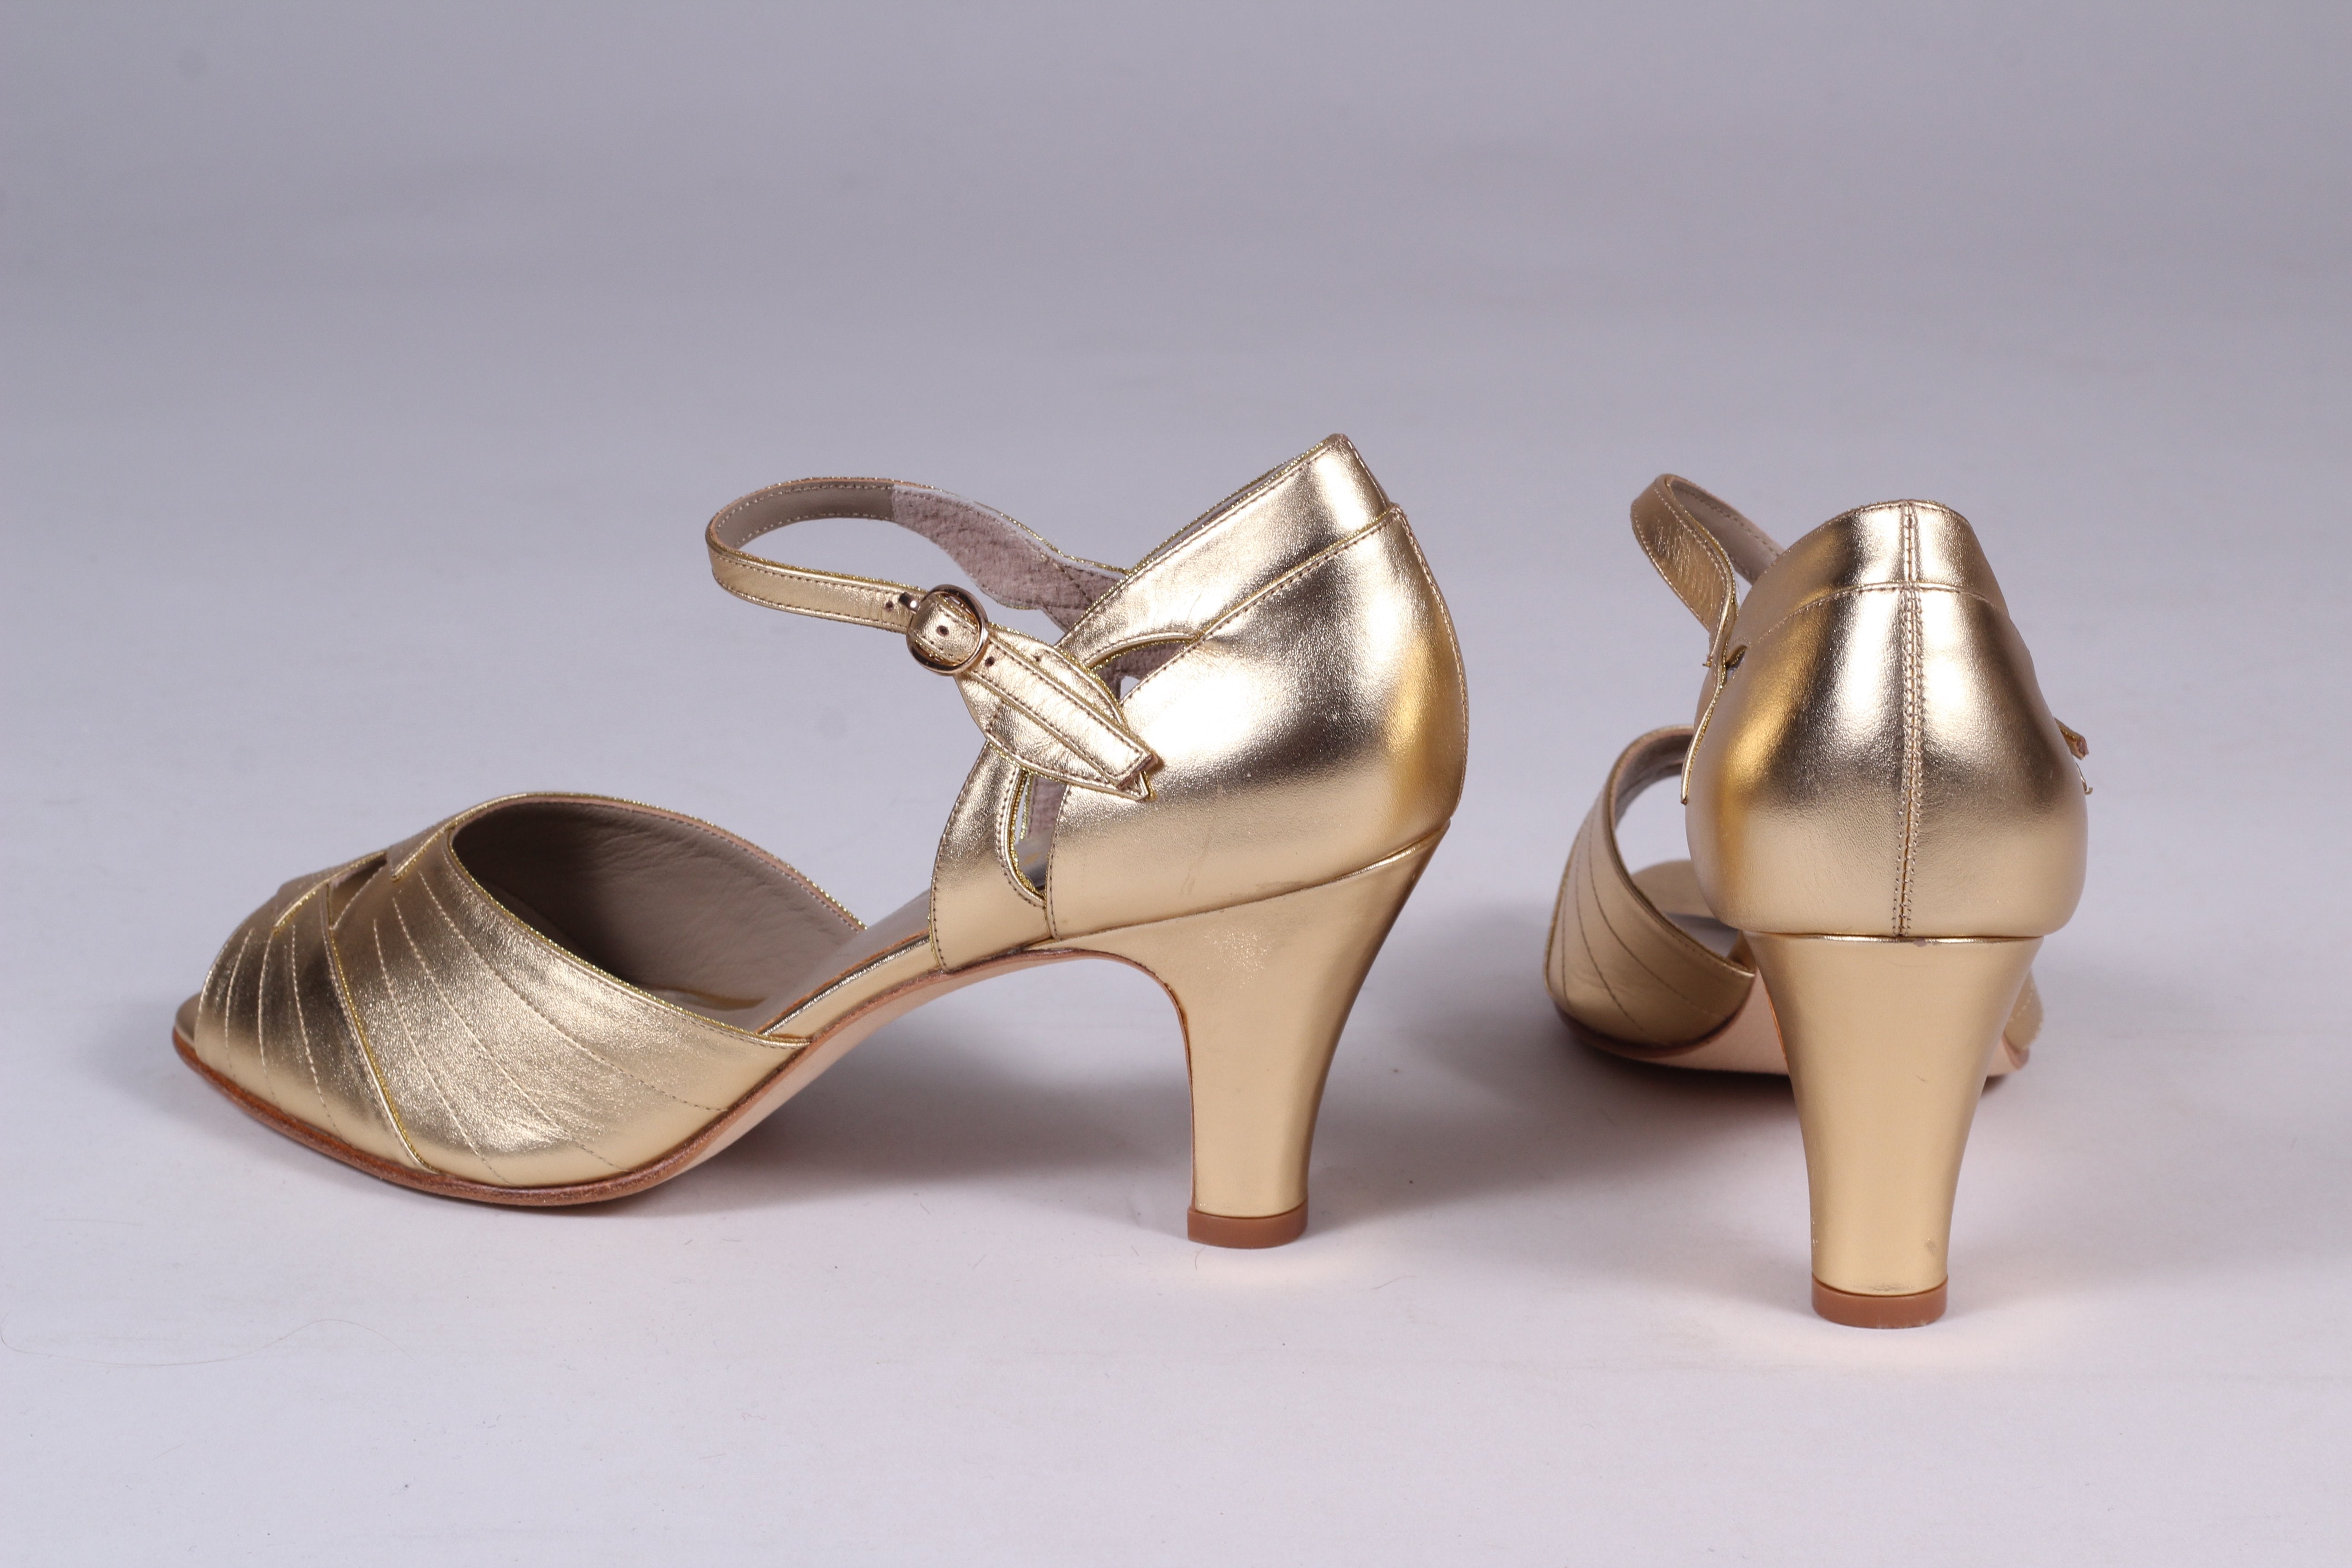 30s inspired high heel evening shoes - gold - Susan